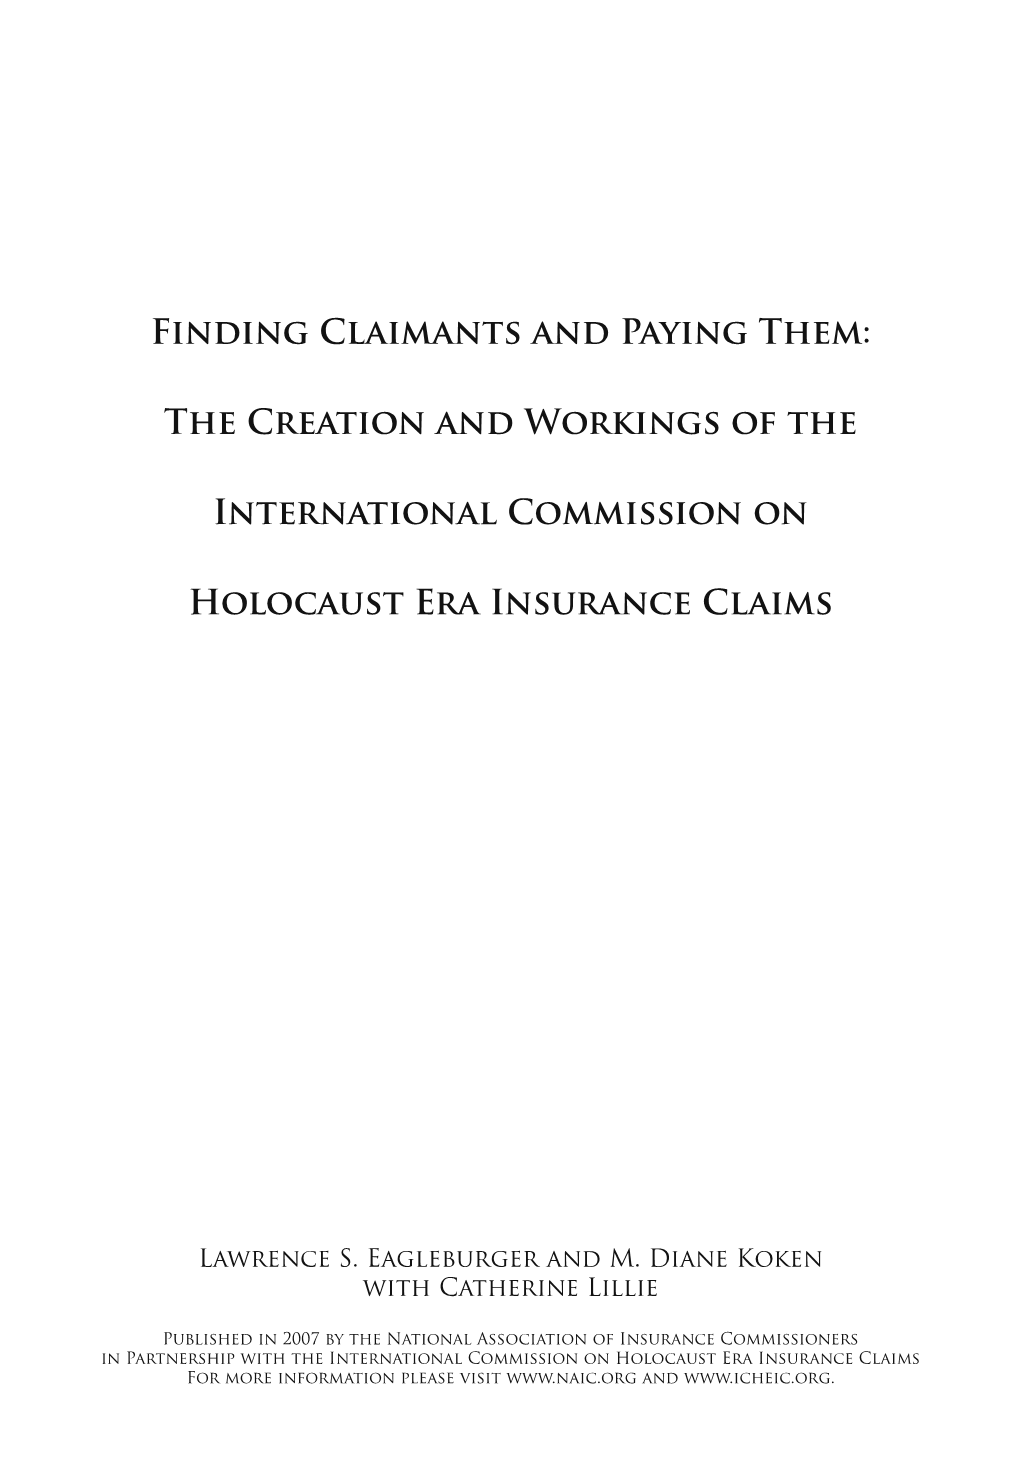 Finding Claimants and Paying Them: the Creation and Workings of The